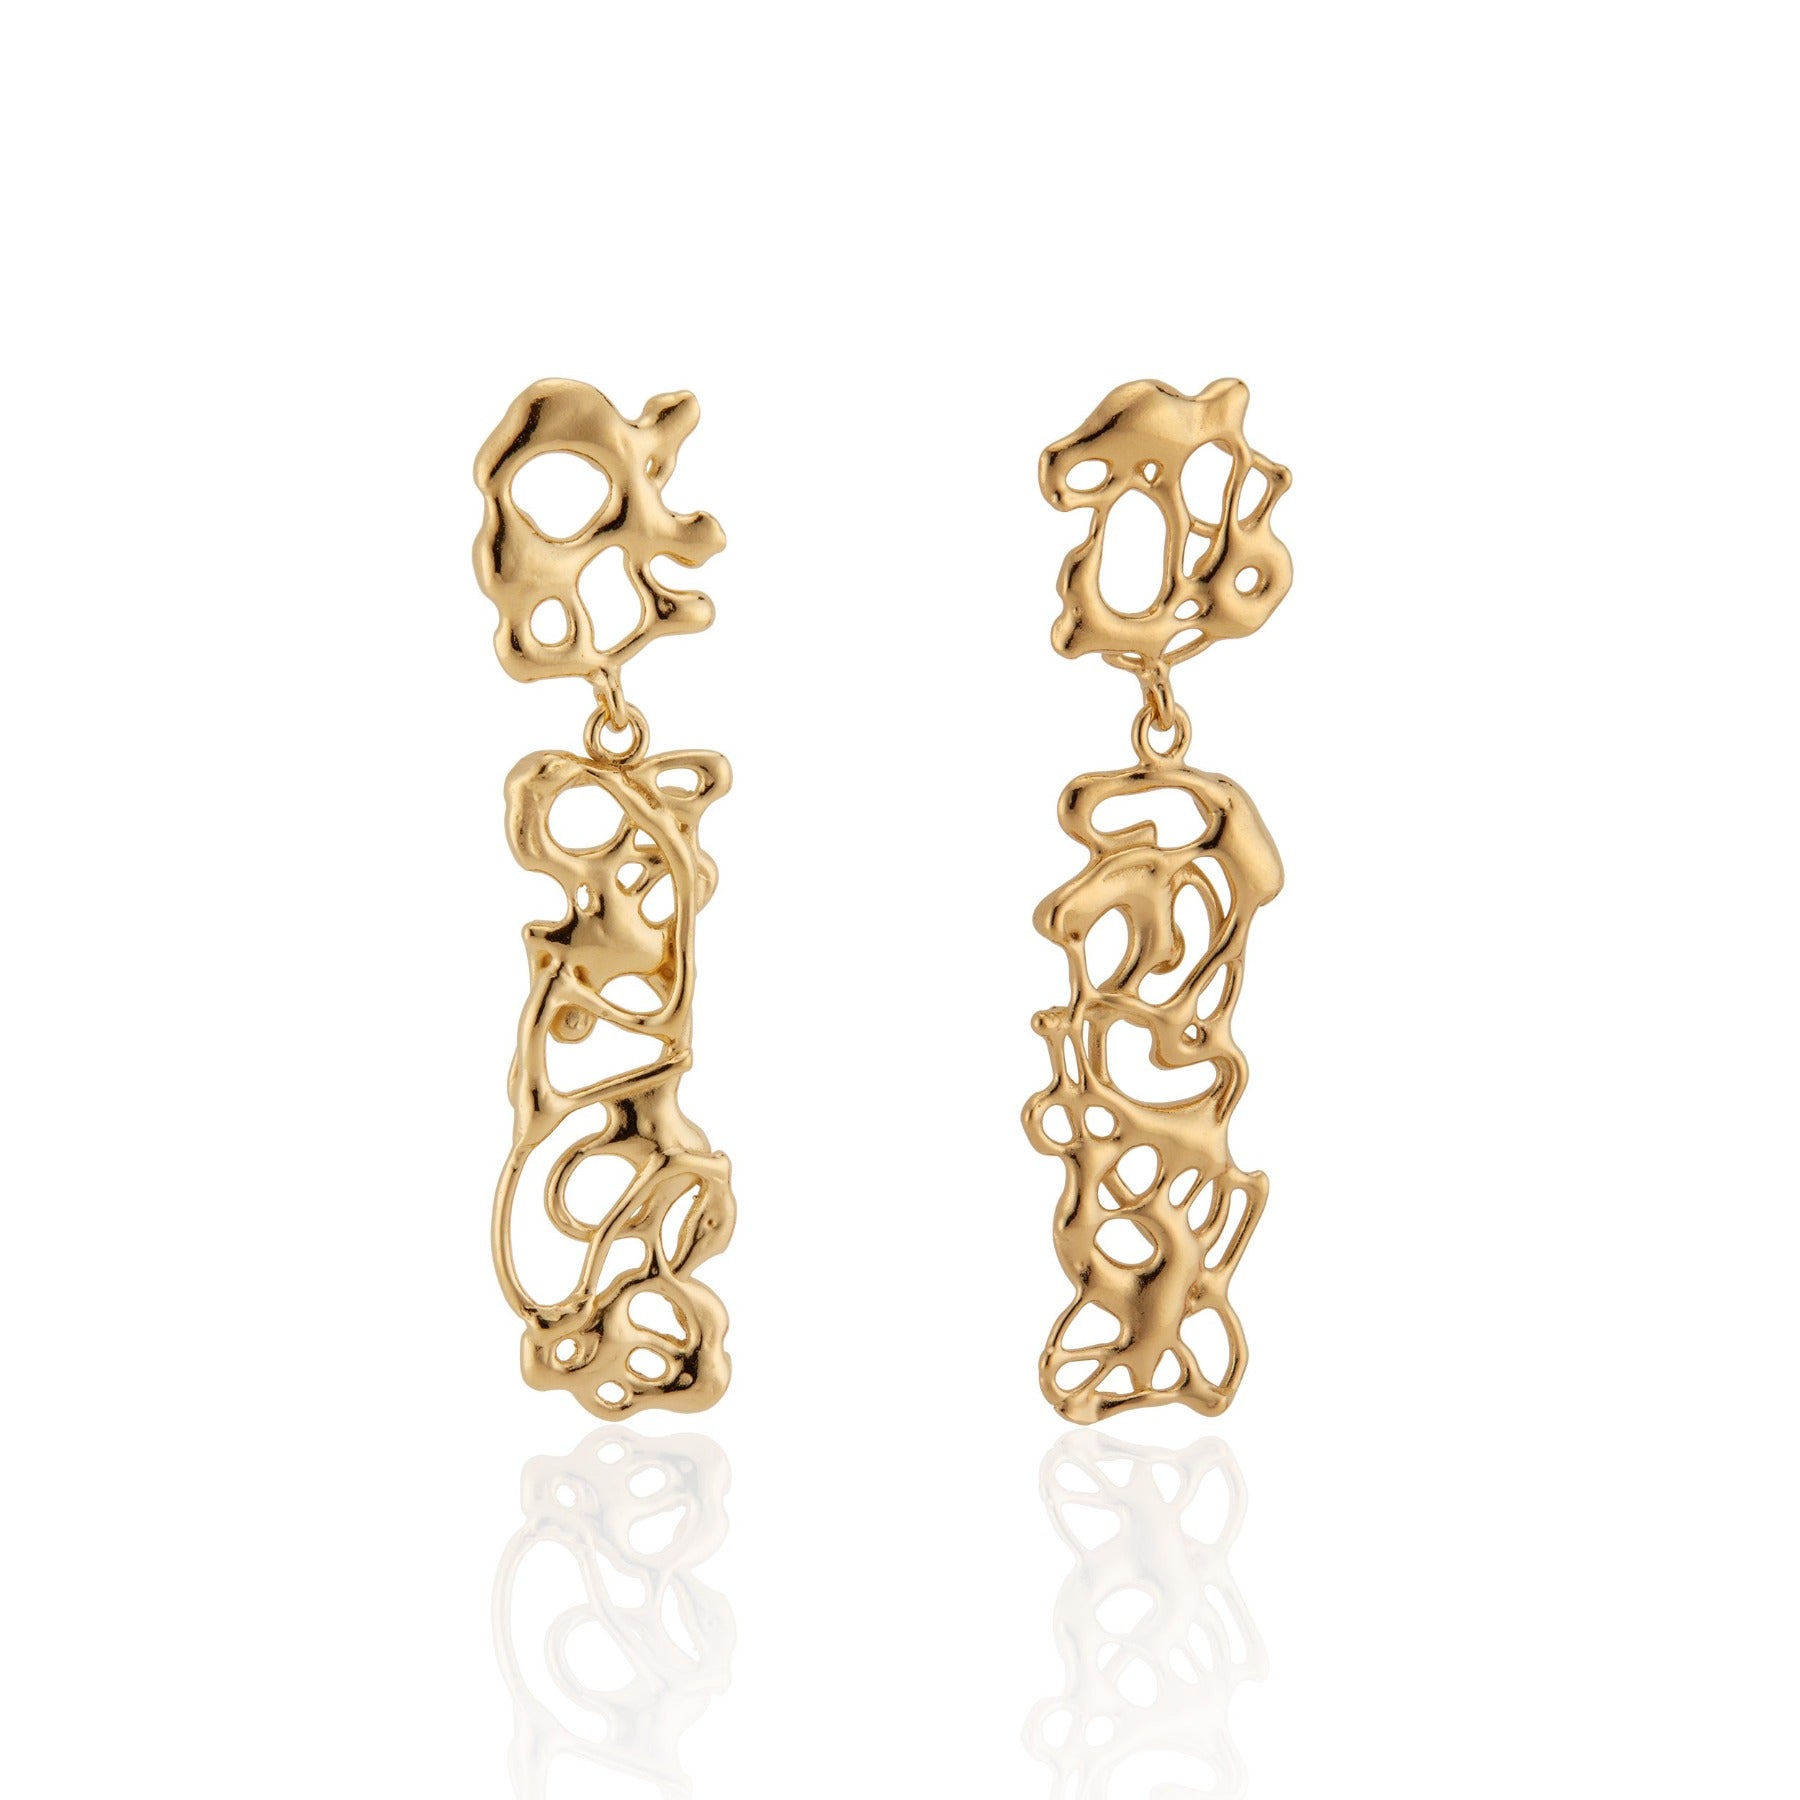 Abstract, squiggle dangling earrings in 18k gold vermeil.